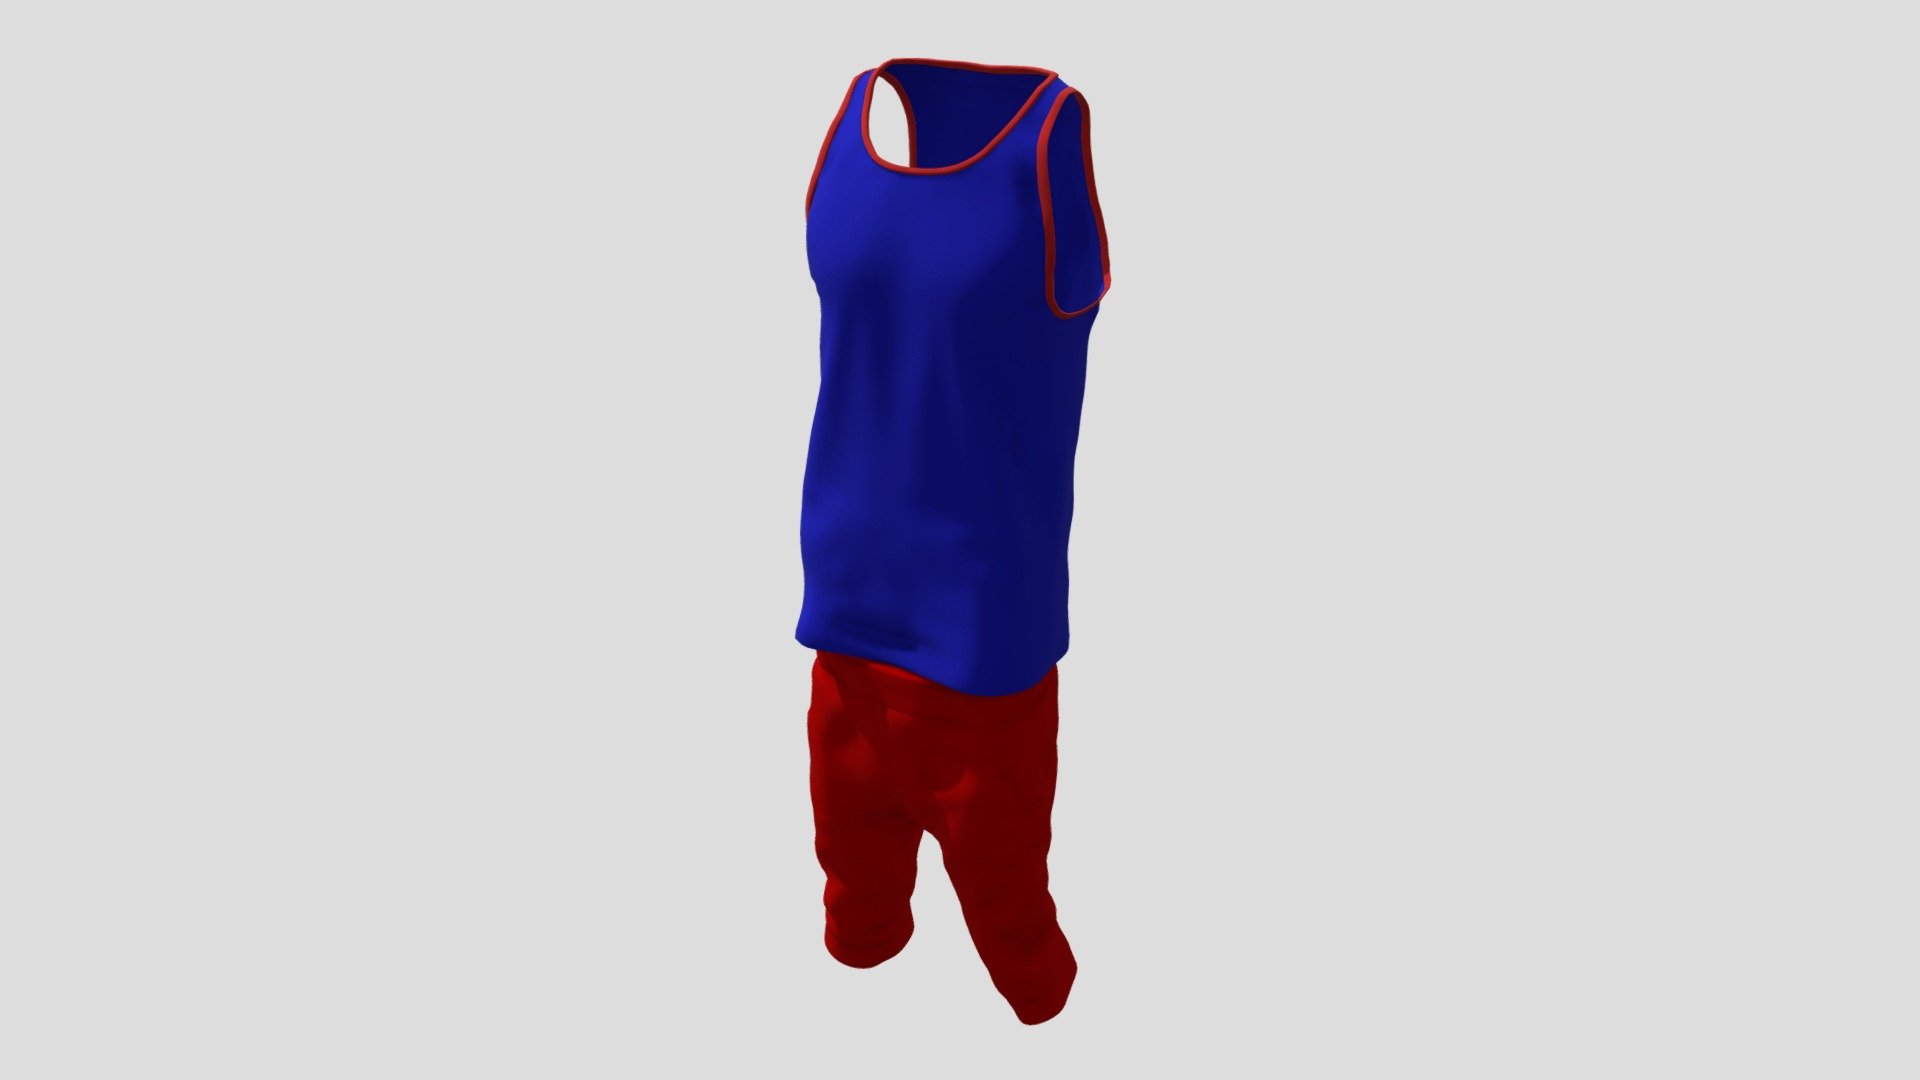 If you need personalized 3d models , feel free to contact at: mr.gbehnamg@yahoo.com - Shorts and stirrups - Buy Royalty Free 3D model by BehNaM (@GbehnamG) 3d model